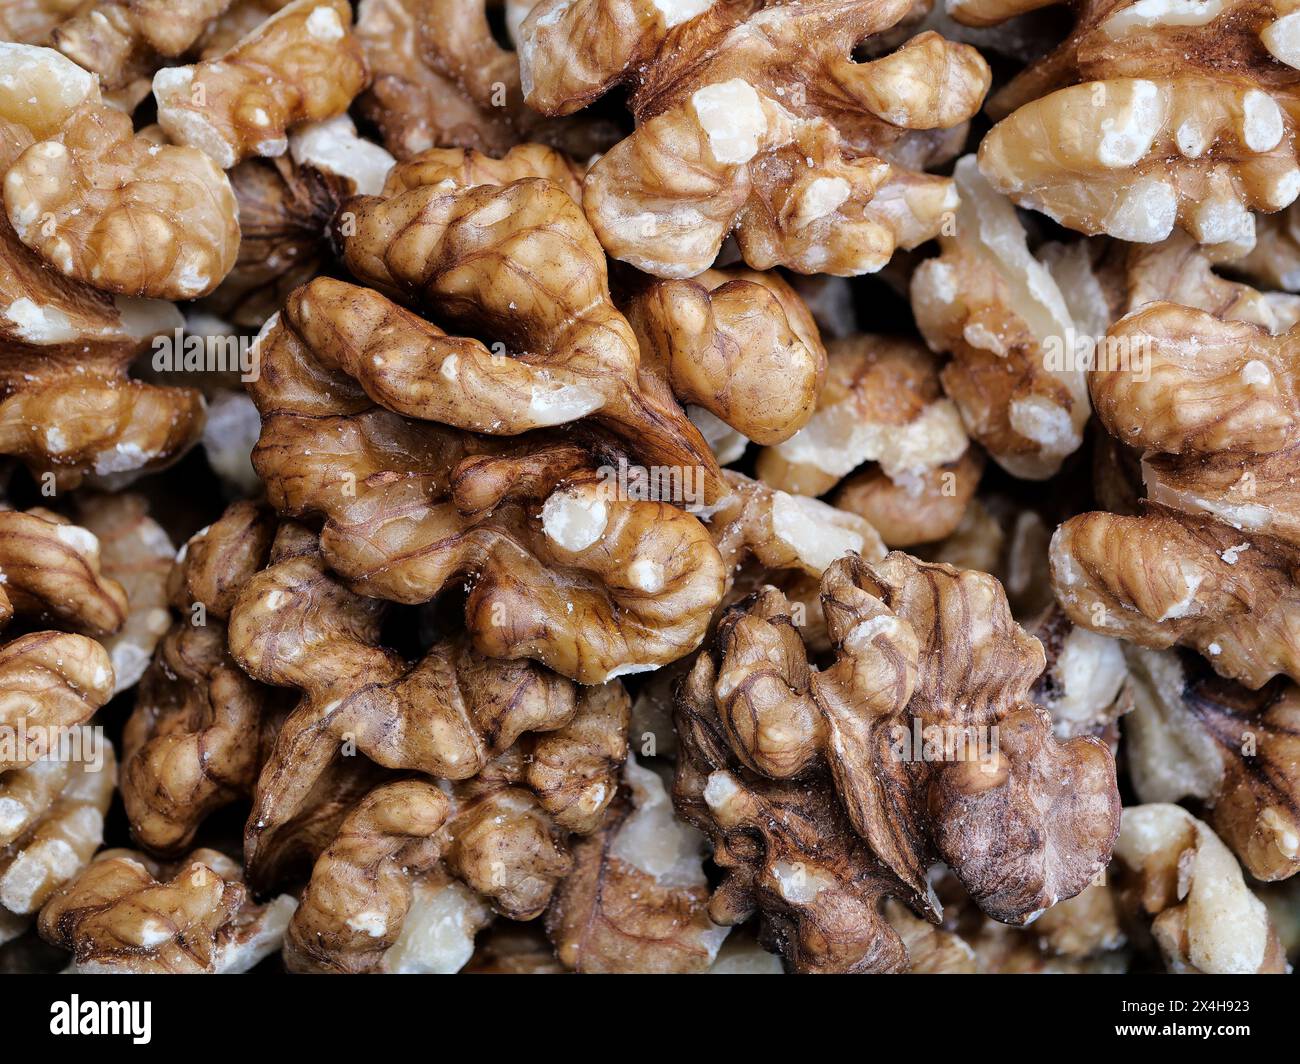 Walnuts: Supermarket treasure, rich in omega-3 fatty acids. Ideal for snacking, baking, salads. Strengthens heart, brain, skin. Stock Photo